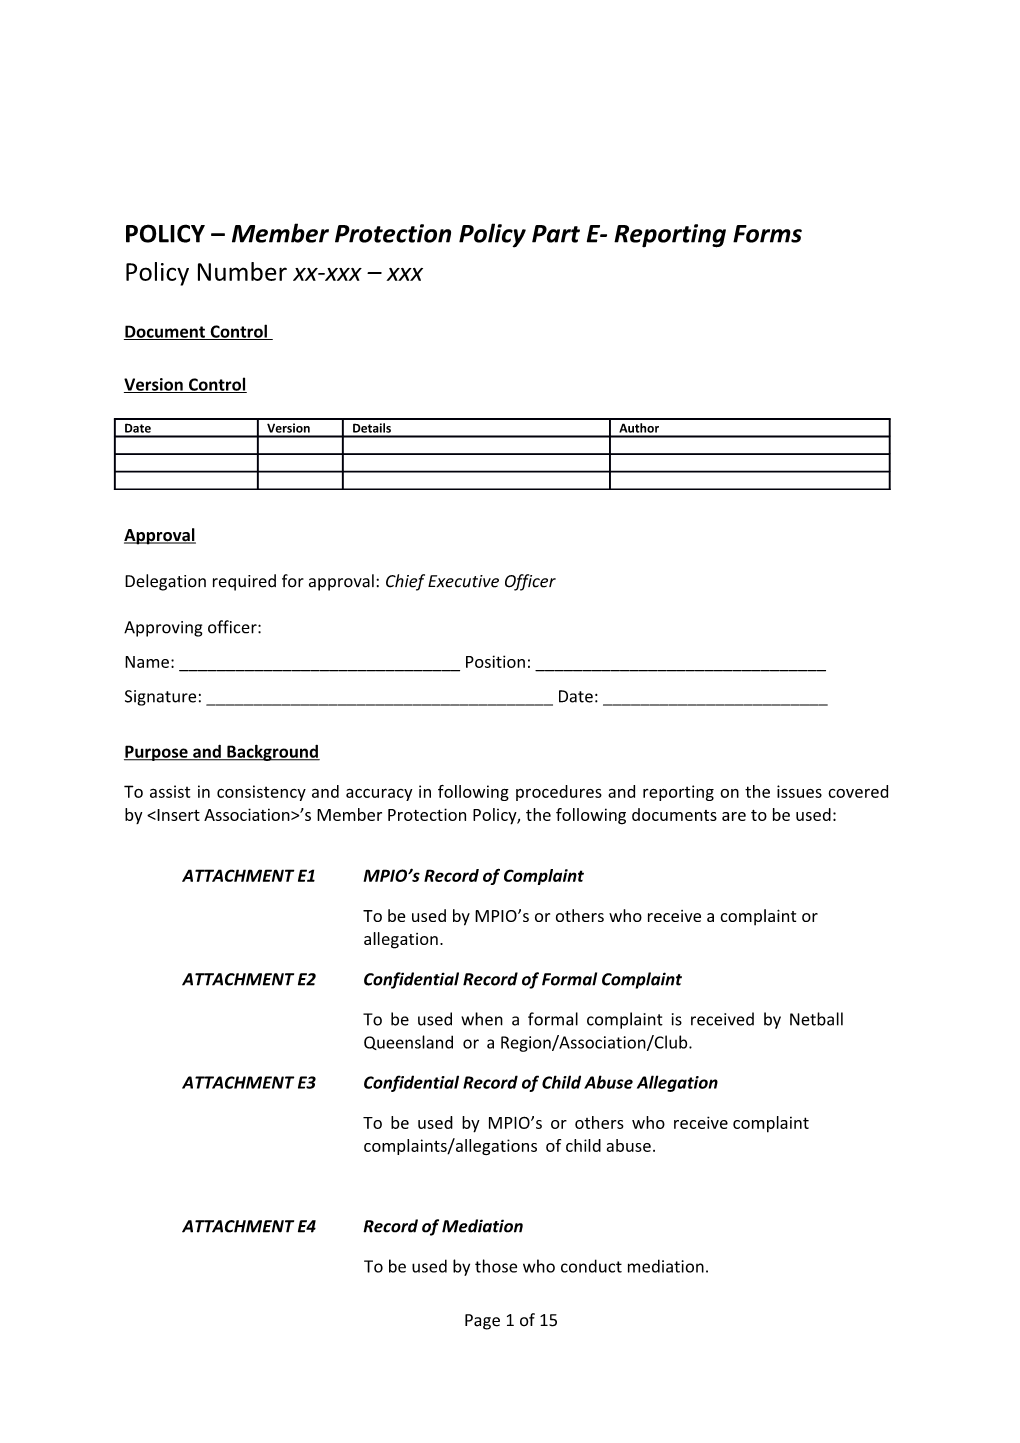 POLICY Member Protection Policy Part E- Reporting Forms